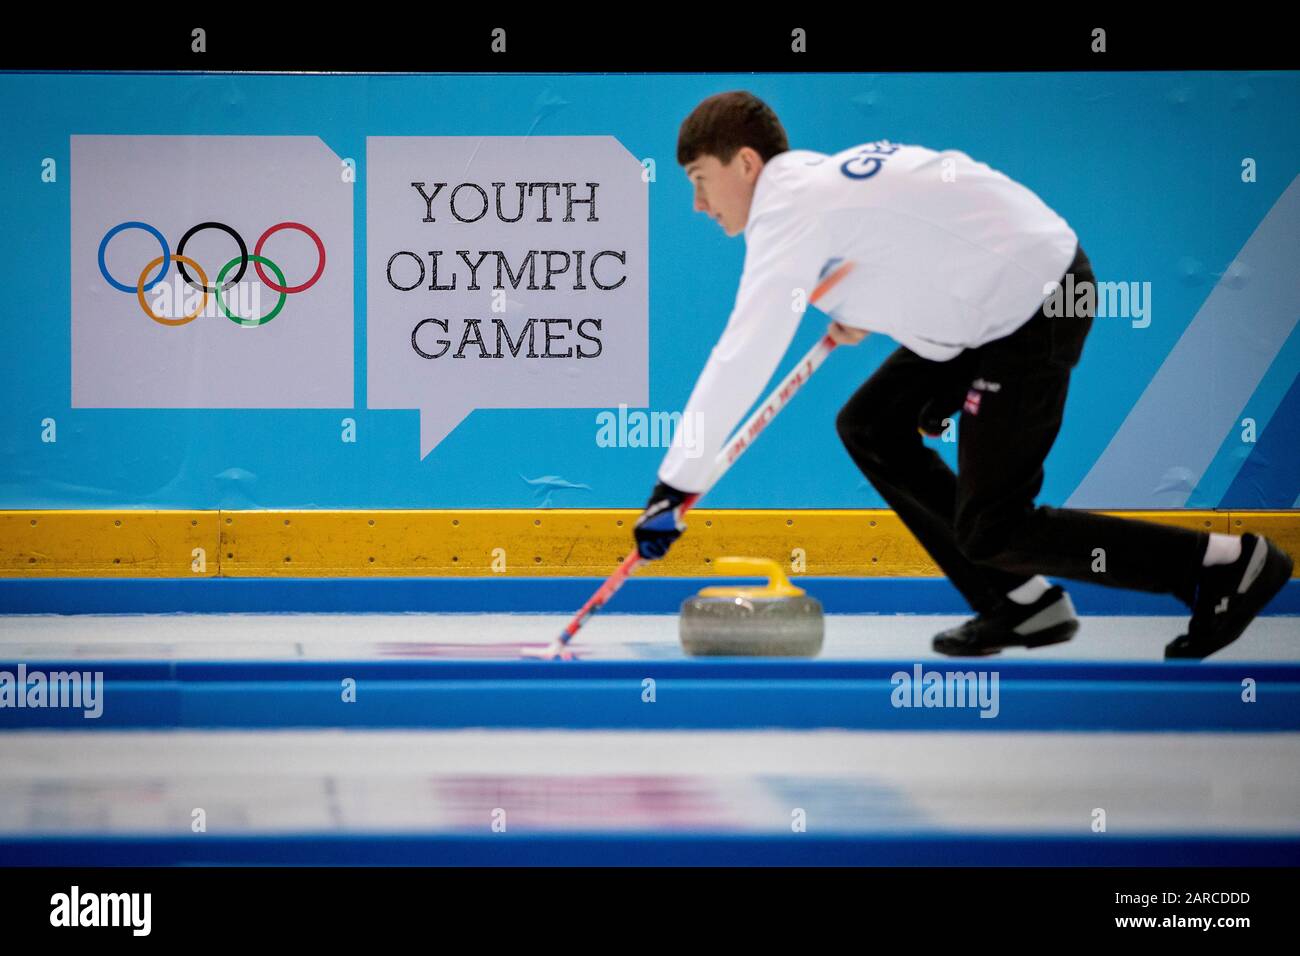 Team GB’s Ross Craik (15) in the curling mixed doubles with teammate Natalie Wiksten (DEN) during the Lausanne 2020 Youth Olympic Games Stock Photo